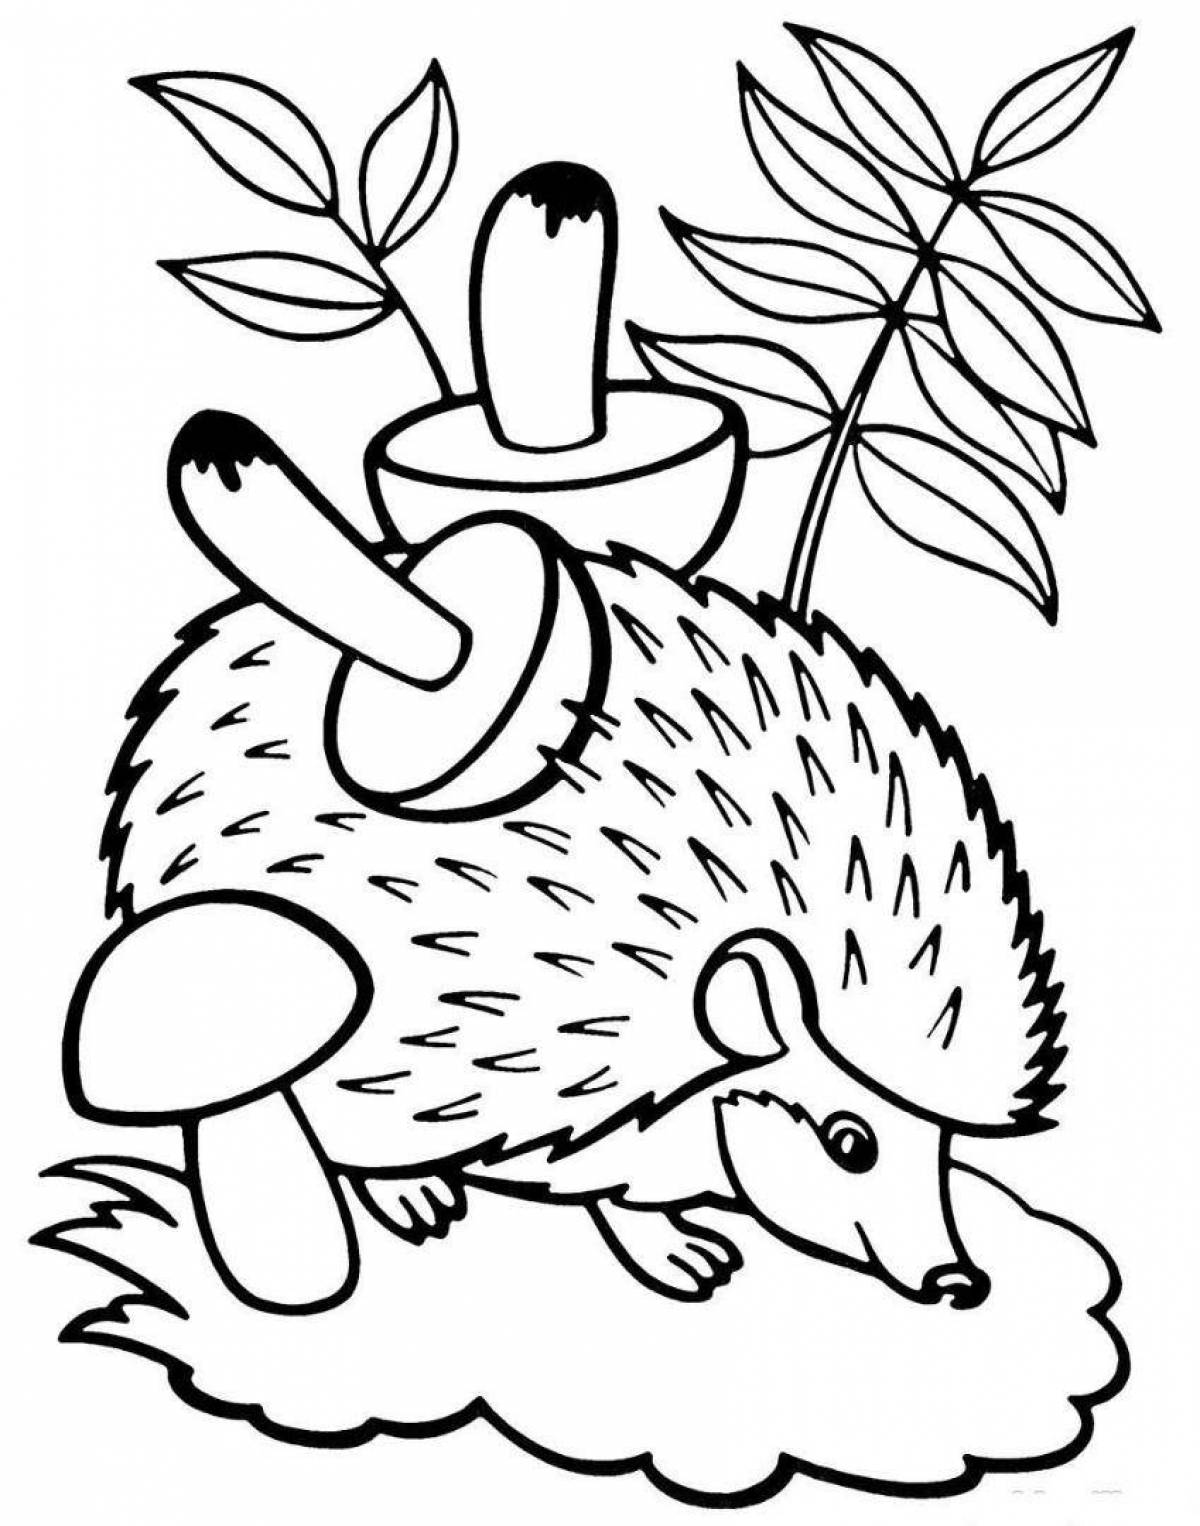 Energetic hedgehog in the forest